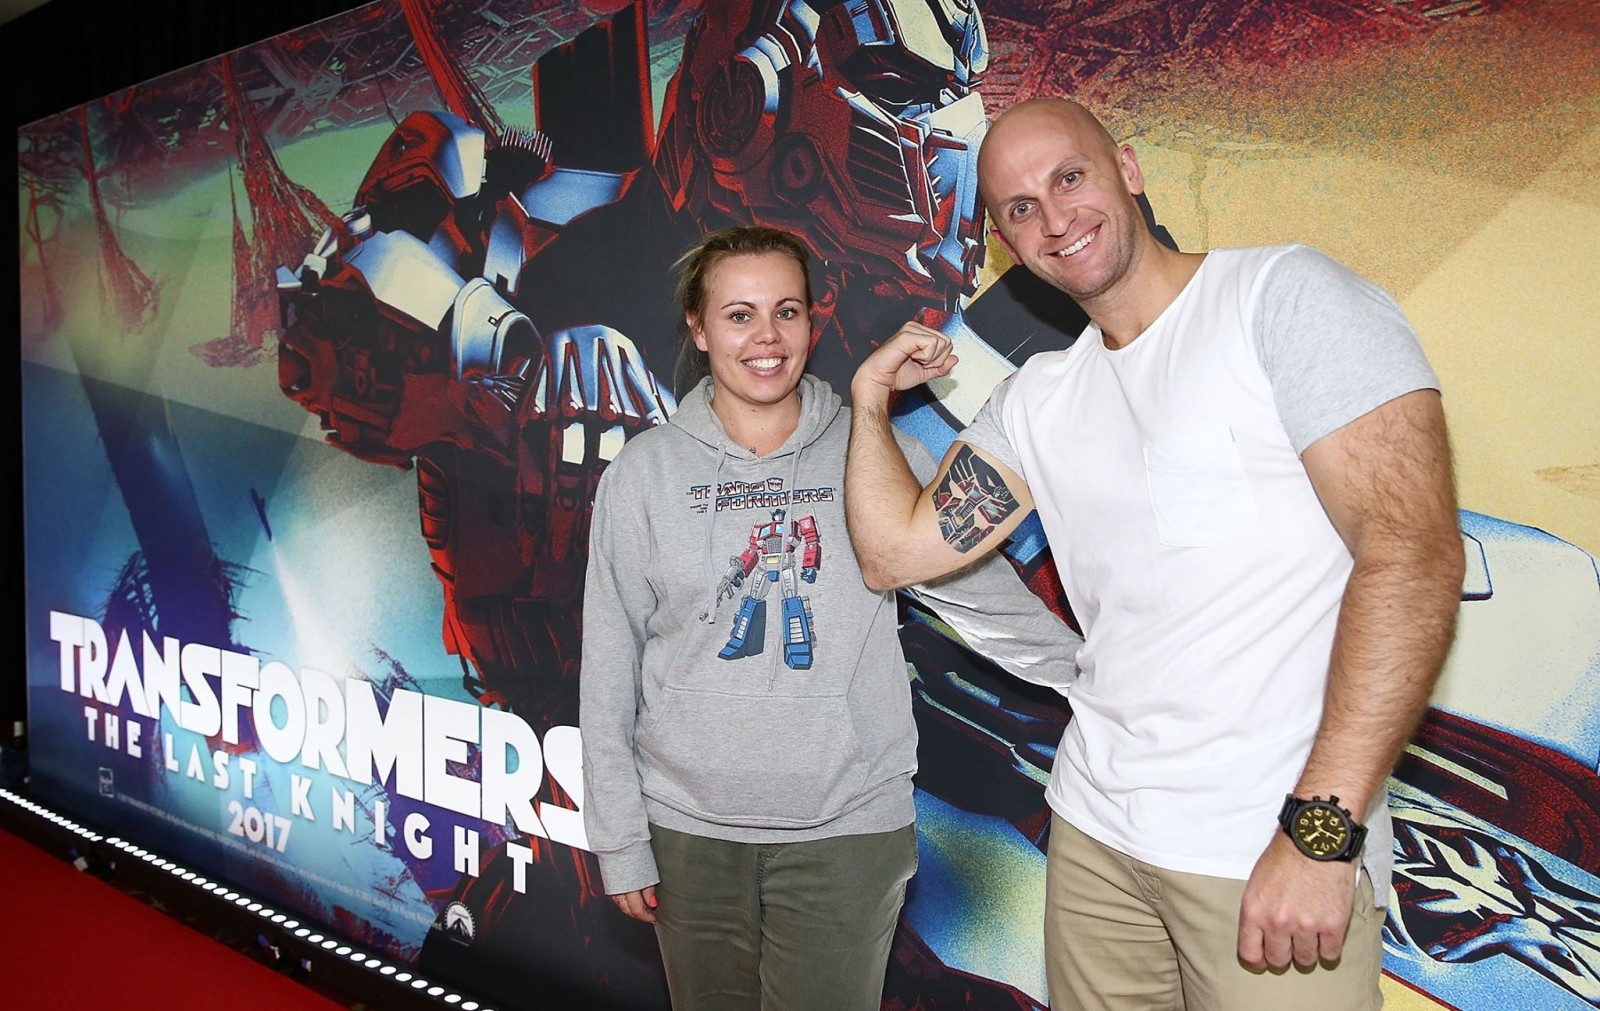 Transformers News: Transformers: The Last Knight Super Fan Event Image Round-Up